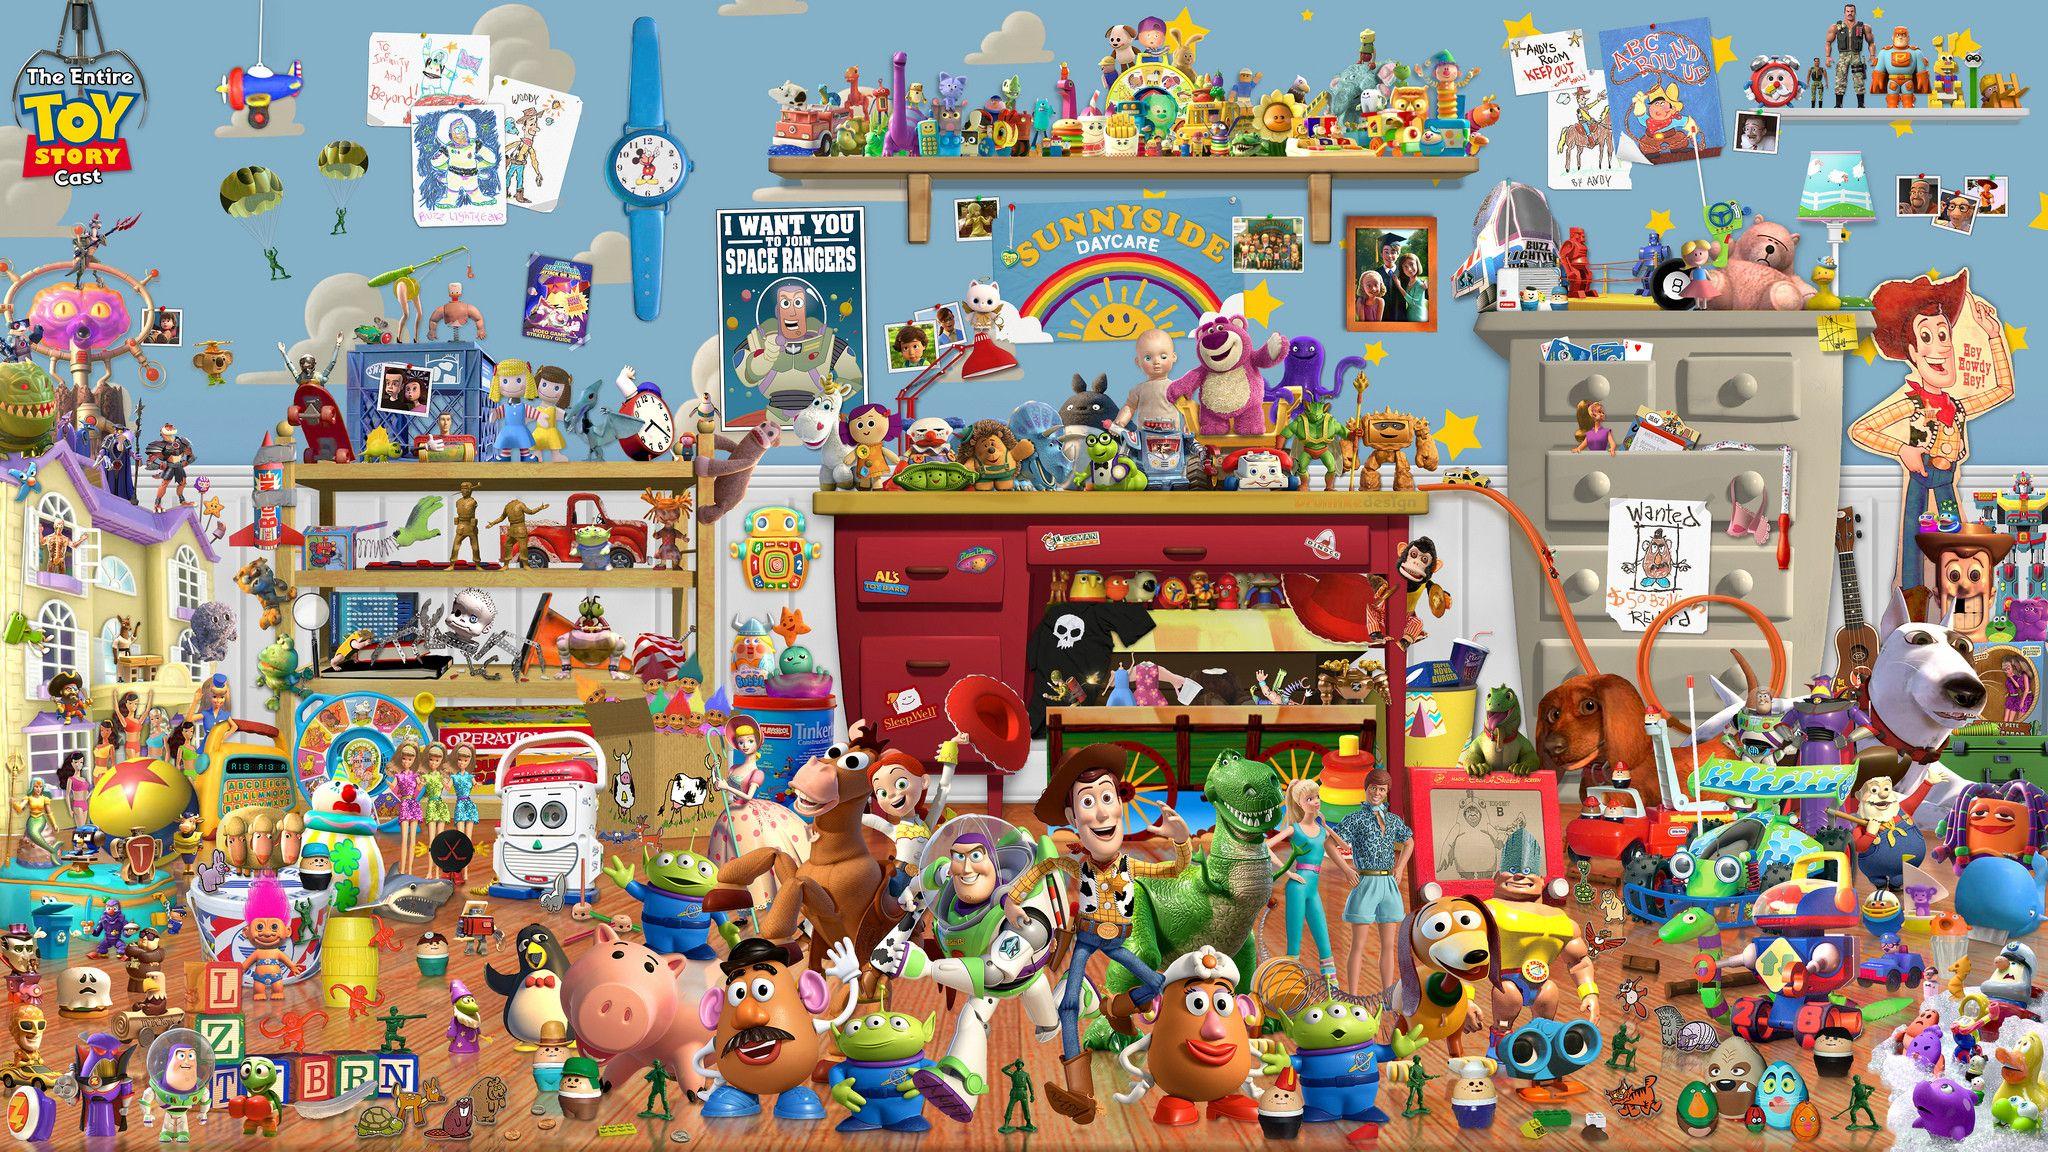 Toy story wallpaper Gallery